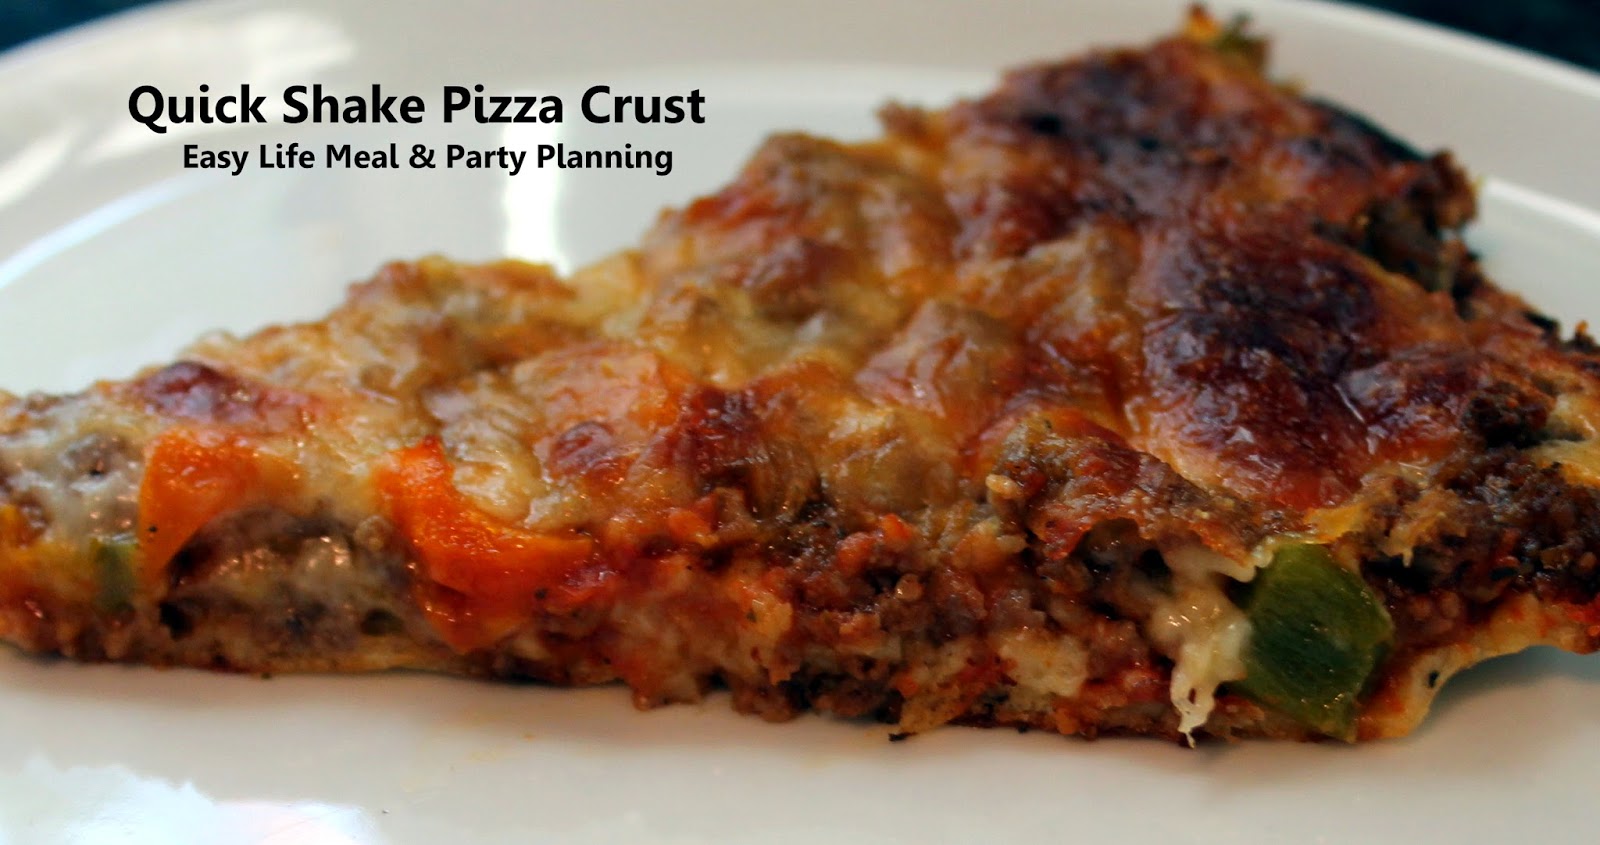 Easy Life Meal & Party Planning: Quick & Easy Pizza Crust - 3 minutes to prepare - no rising, no kneading, and no rolling & amazing!